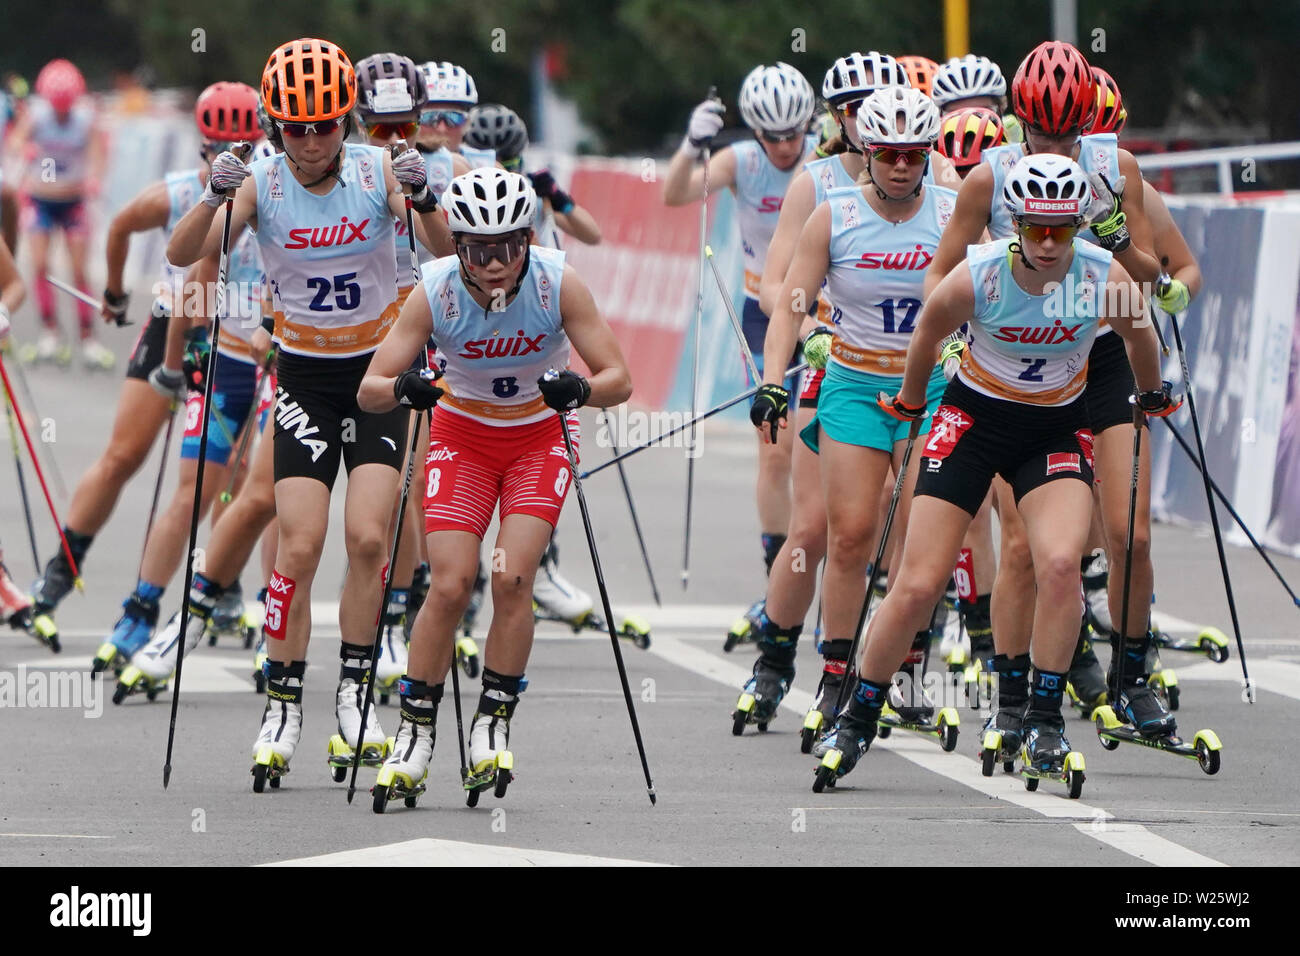 Beijing, China. 6th July, 2019. Anikken Gjerde Alnaes (2nd R) of Norway competes during the Women's 15.9km Mass Start of 2019 FIS China Beijing Roller Ski World Cup in Beijing, China on July 6, 2019. Credit: Ju Huanzong/Xinhua/Alamy Live News Stock Photo